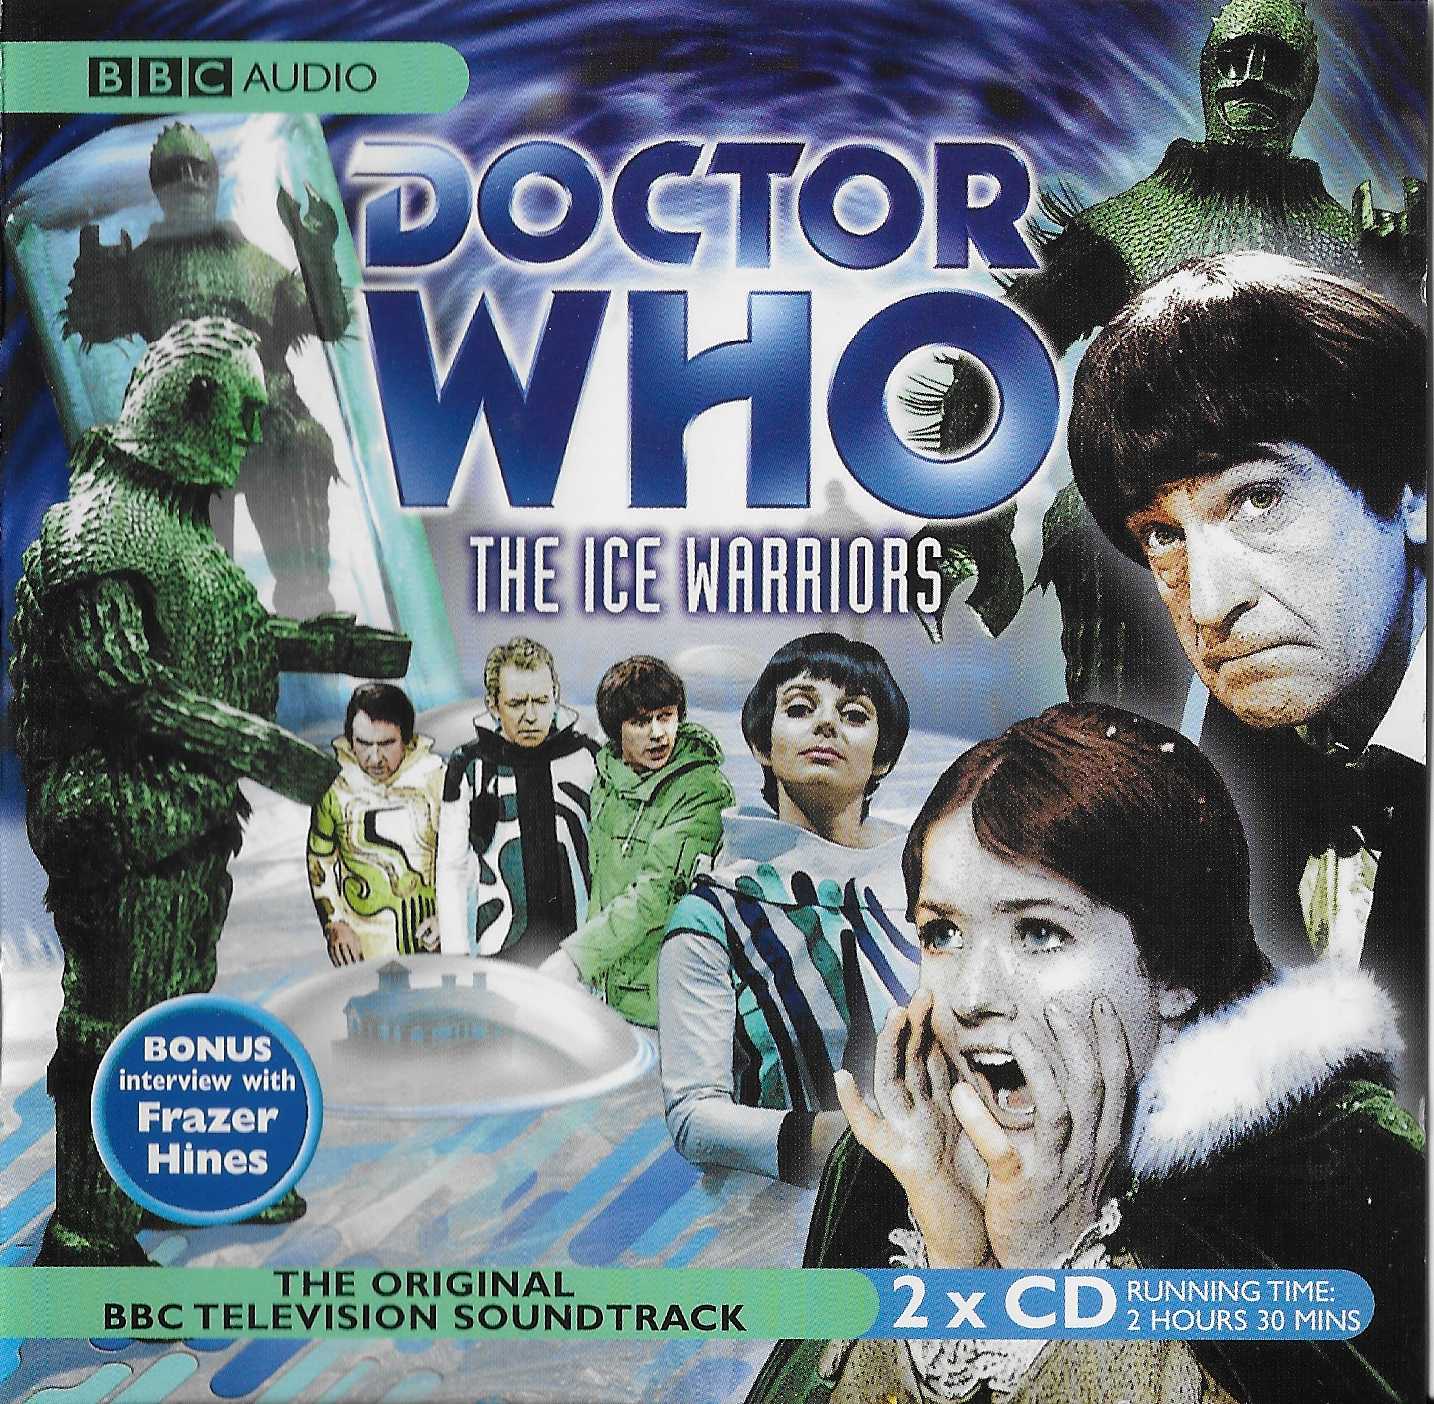 Picture of ISBN 0-563-50423-4 Doctor Who - The Ice Warriors by artist Brian Hayles from the BBC cds - Records and Tapes library